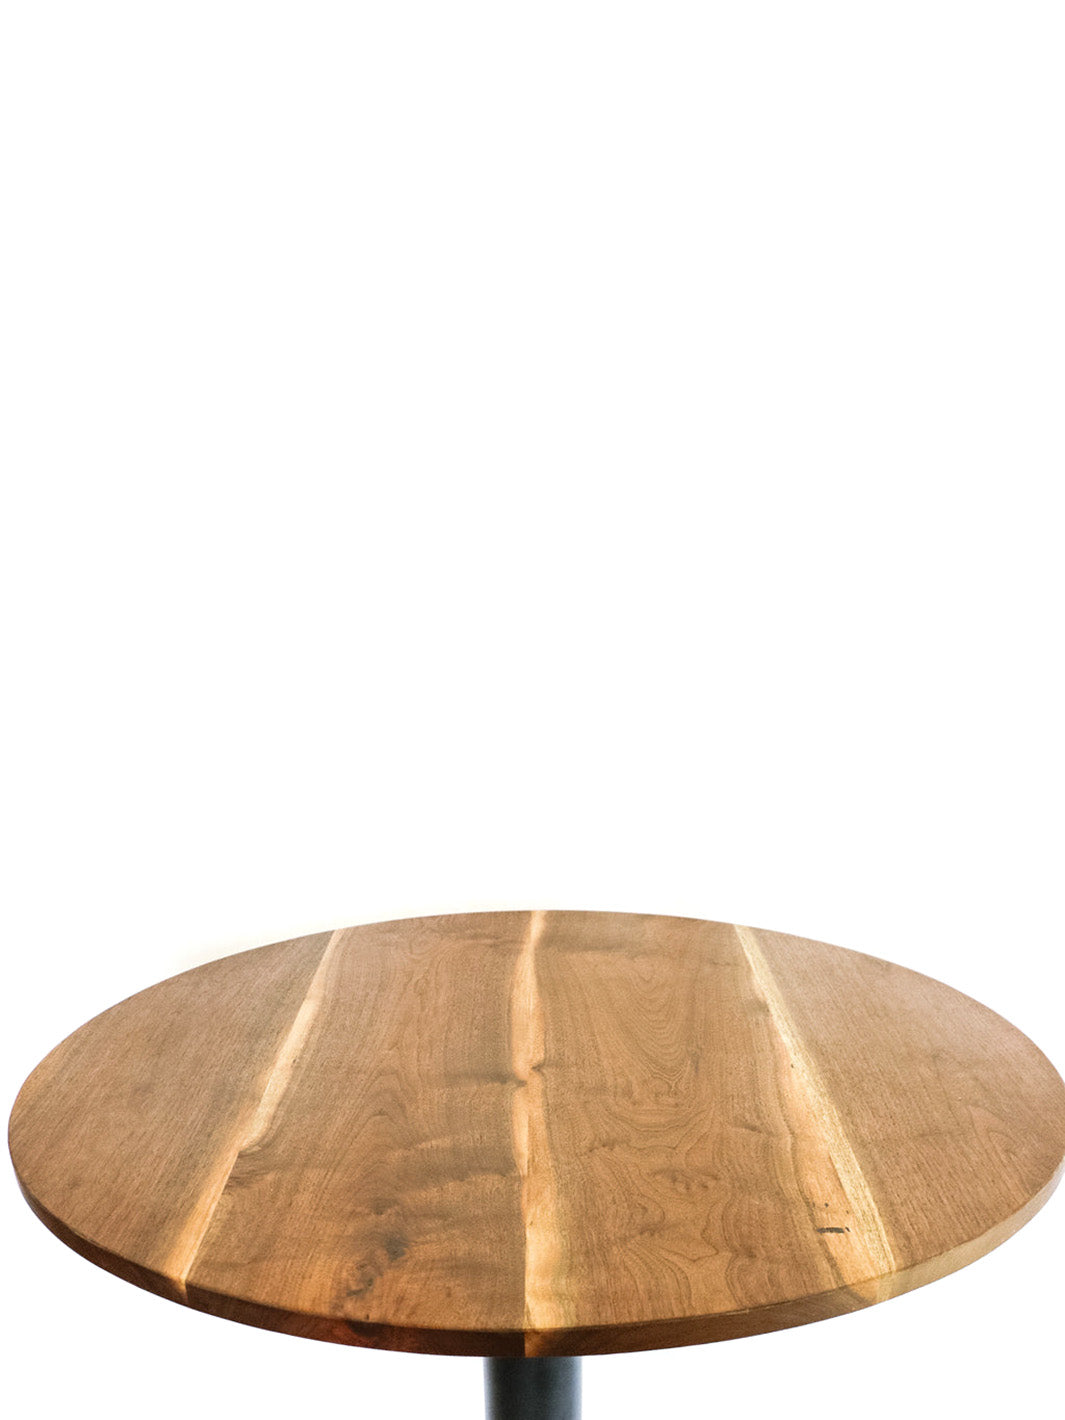 Modern Round Walnut Pub Table with Black Steel Legs | Bar or Standard Height Earthly Comfort Dining Tables 804-2